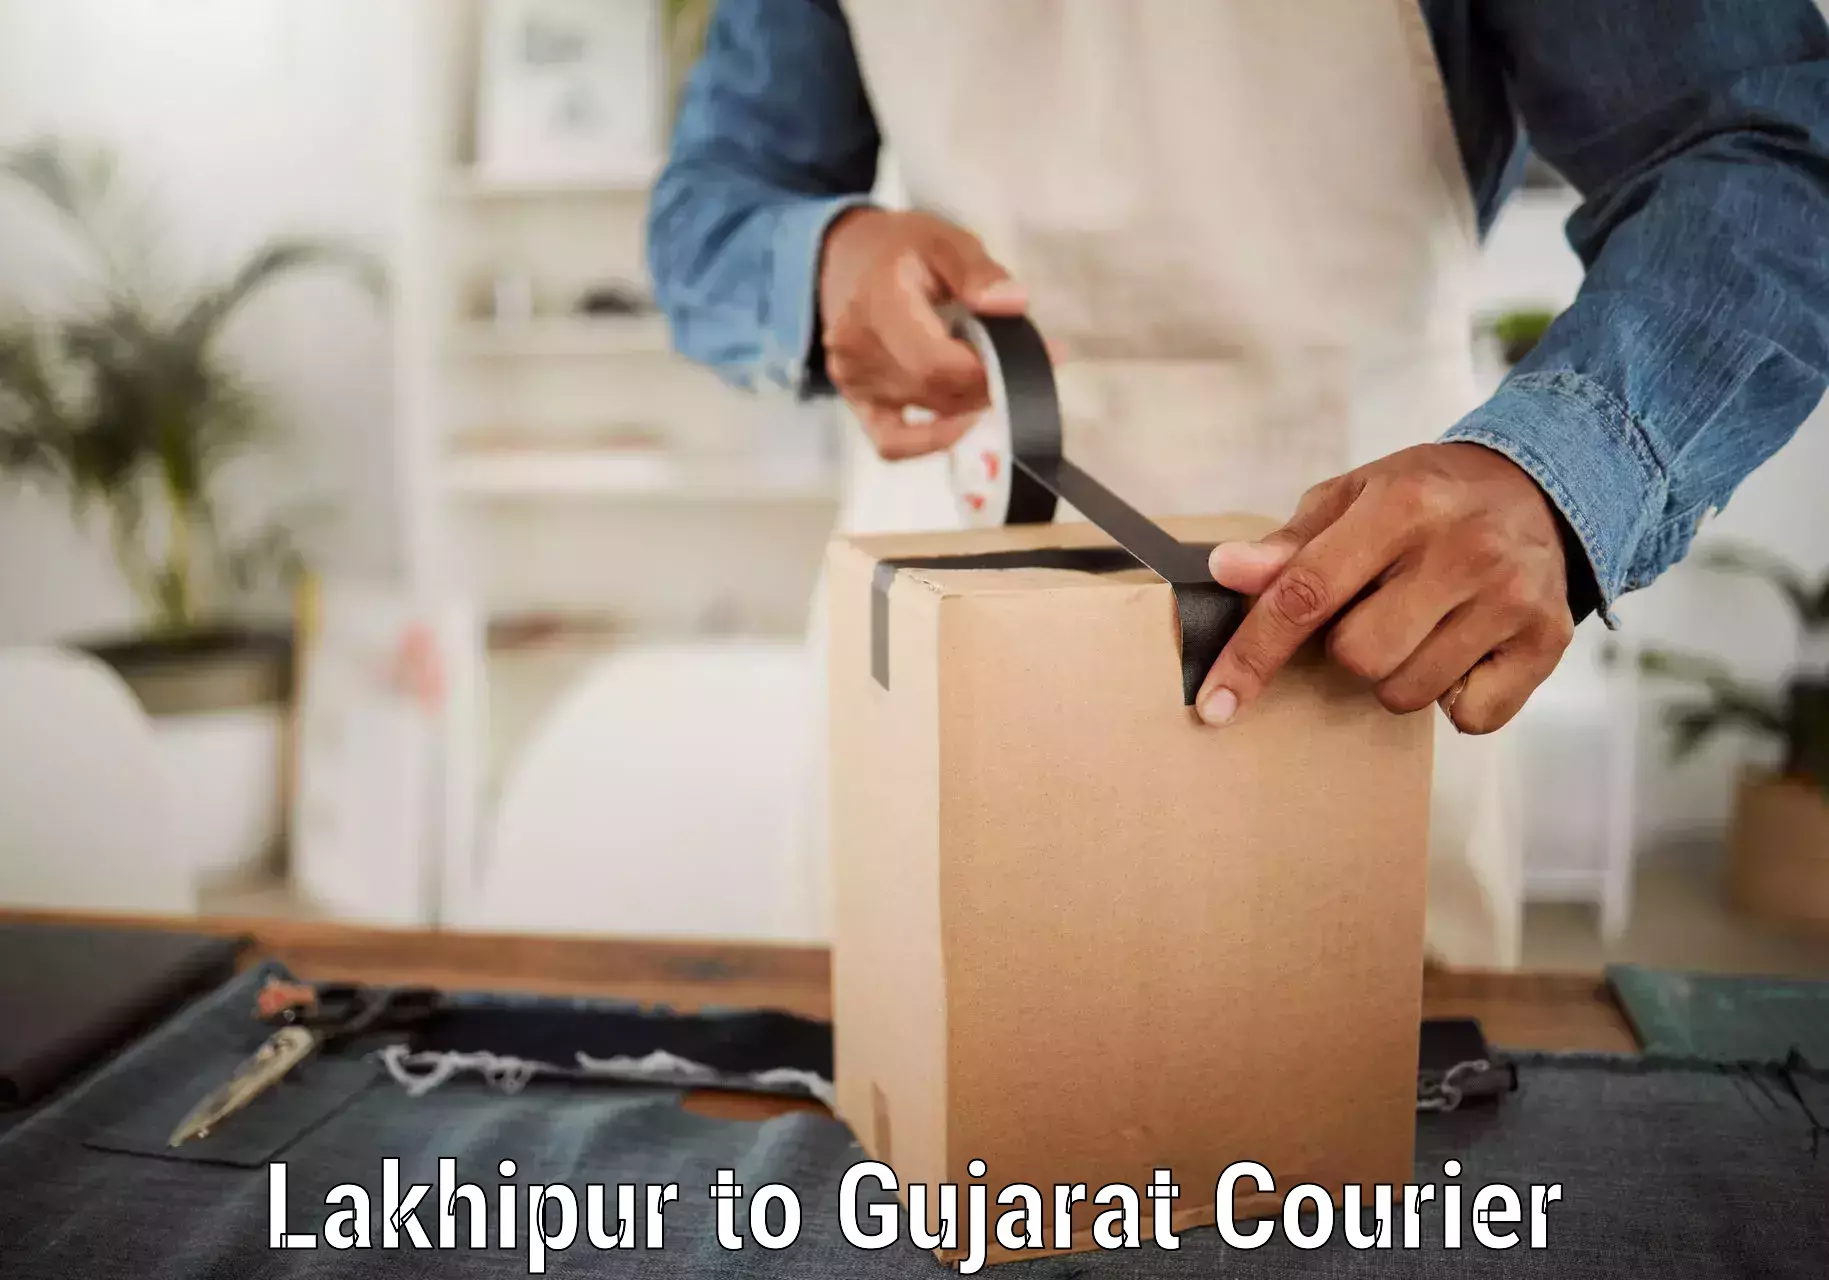 24-hour courier service Lakhipur to Lunawada